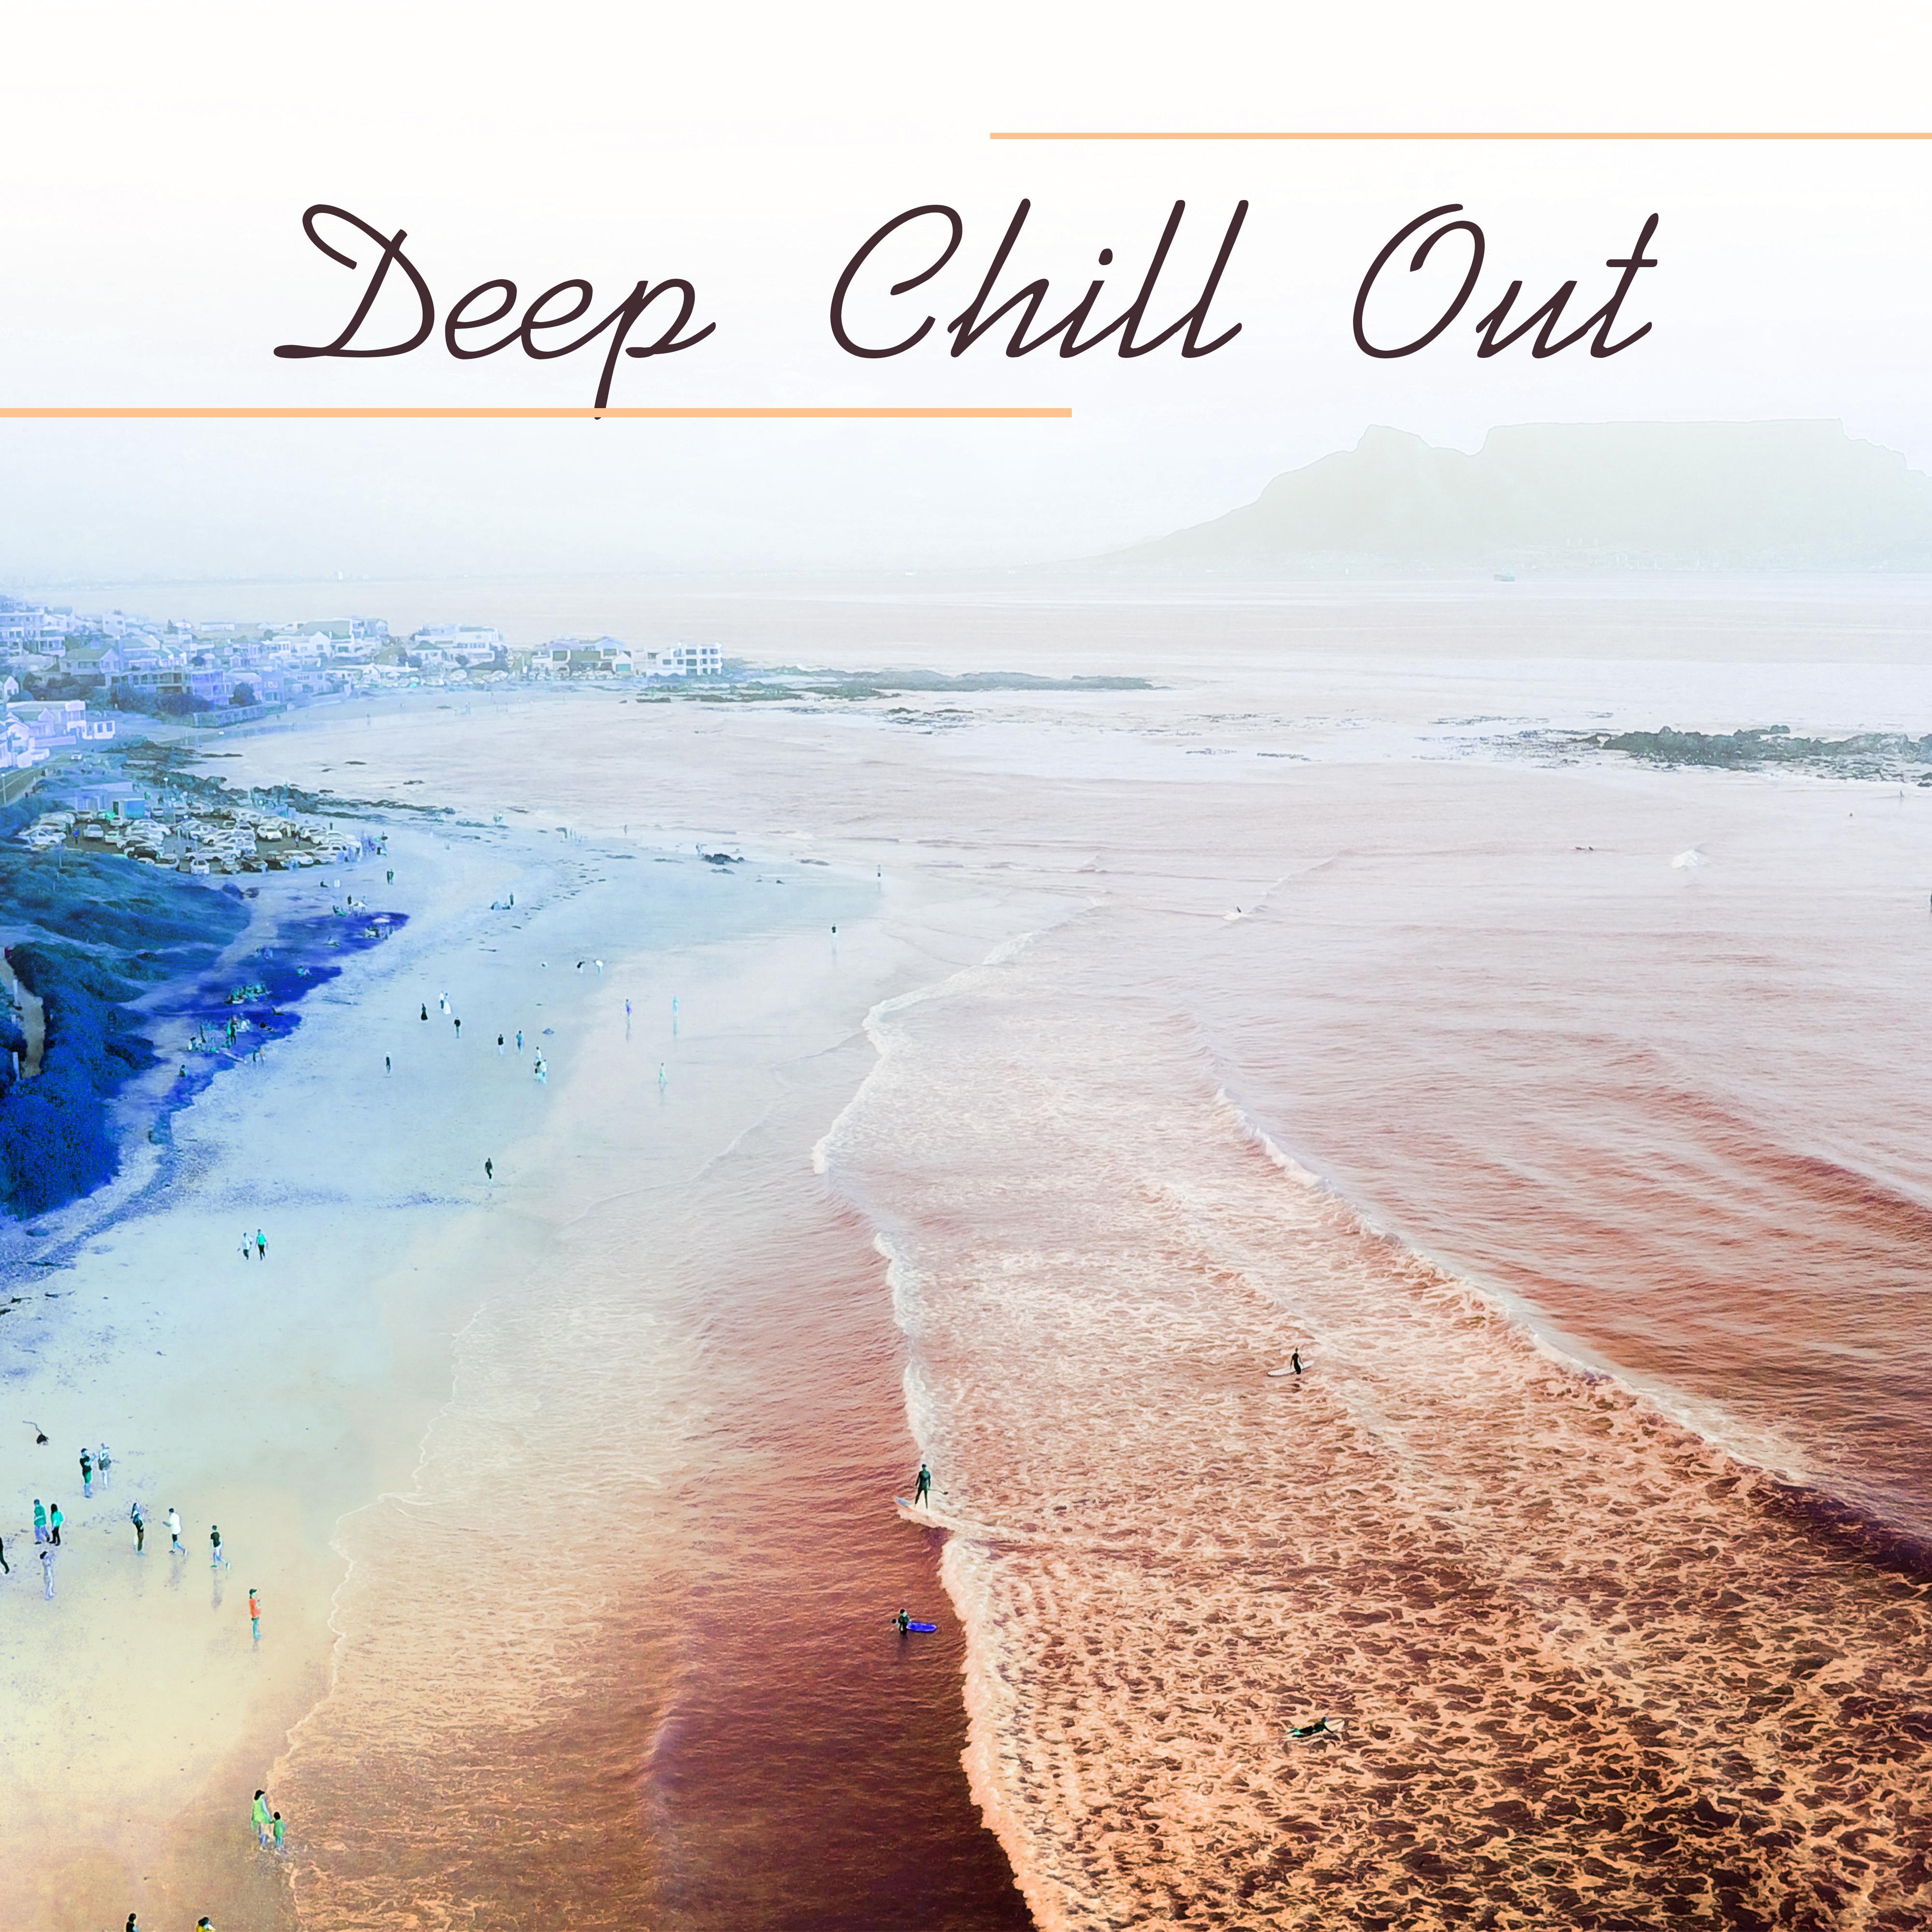 Deep Chill Out  Calm Sounds to Rest, Easy Listening, Chill Out Relaxation, Summer Waves